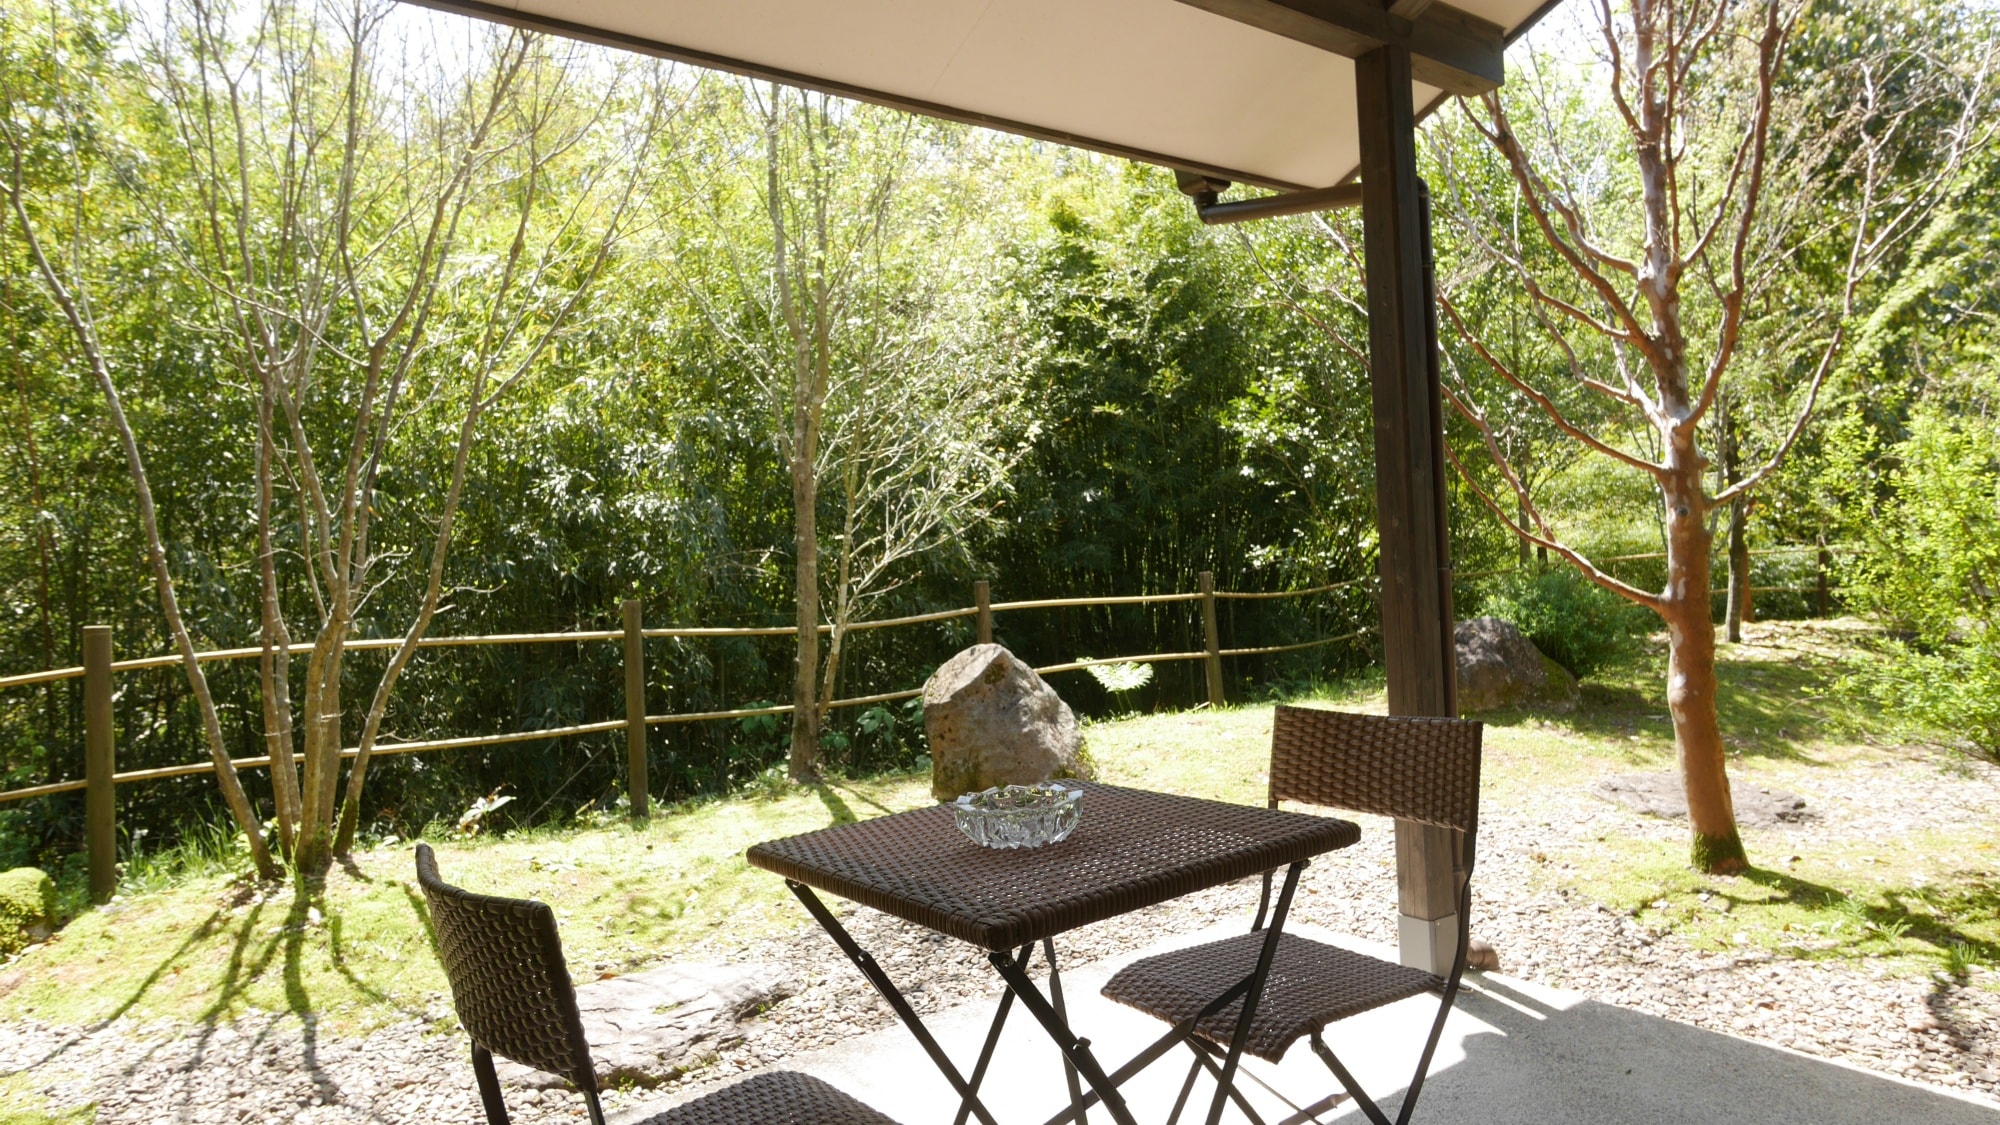 The detached rooms have a terrace. Enjoy a moment of conversation with your loved ones surrounded by pleasant nature.